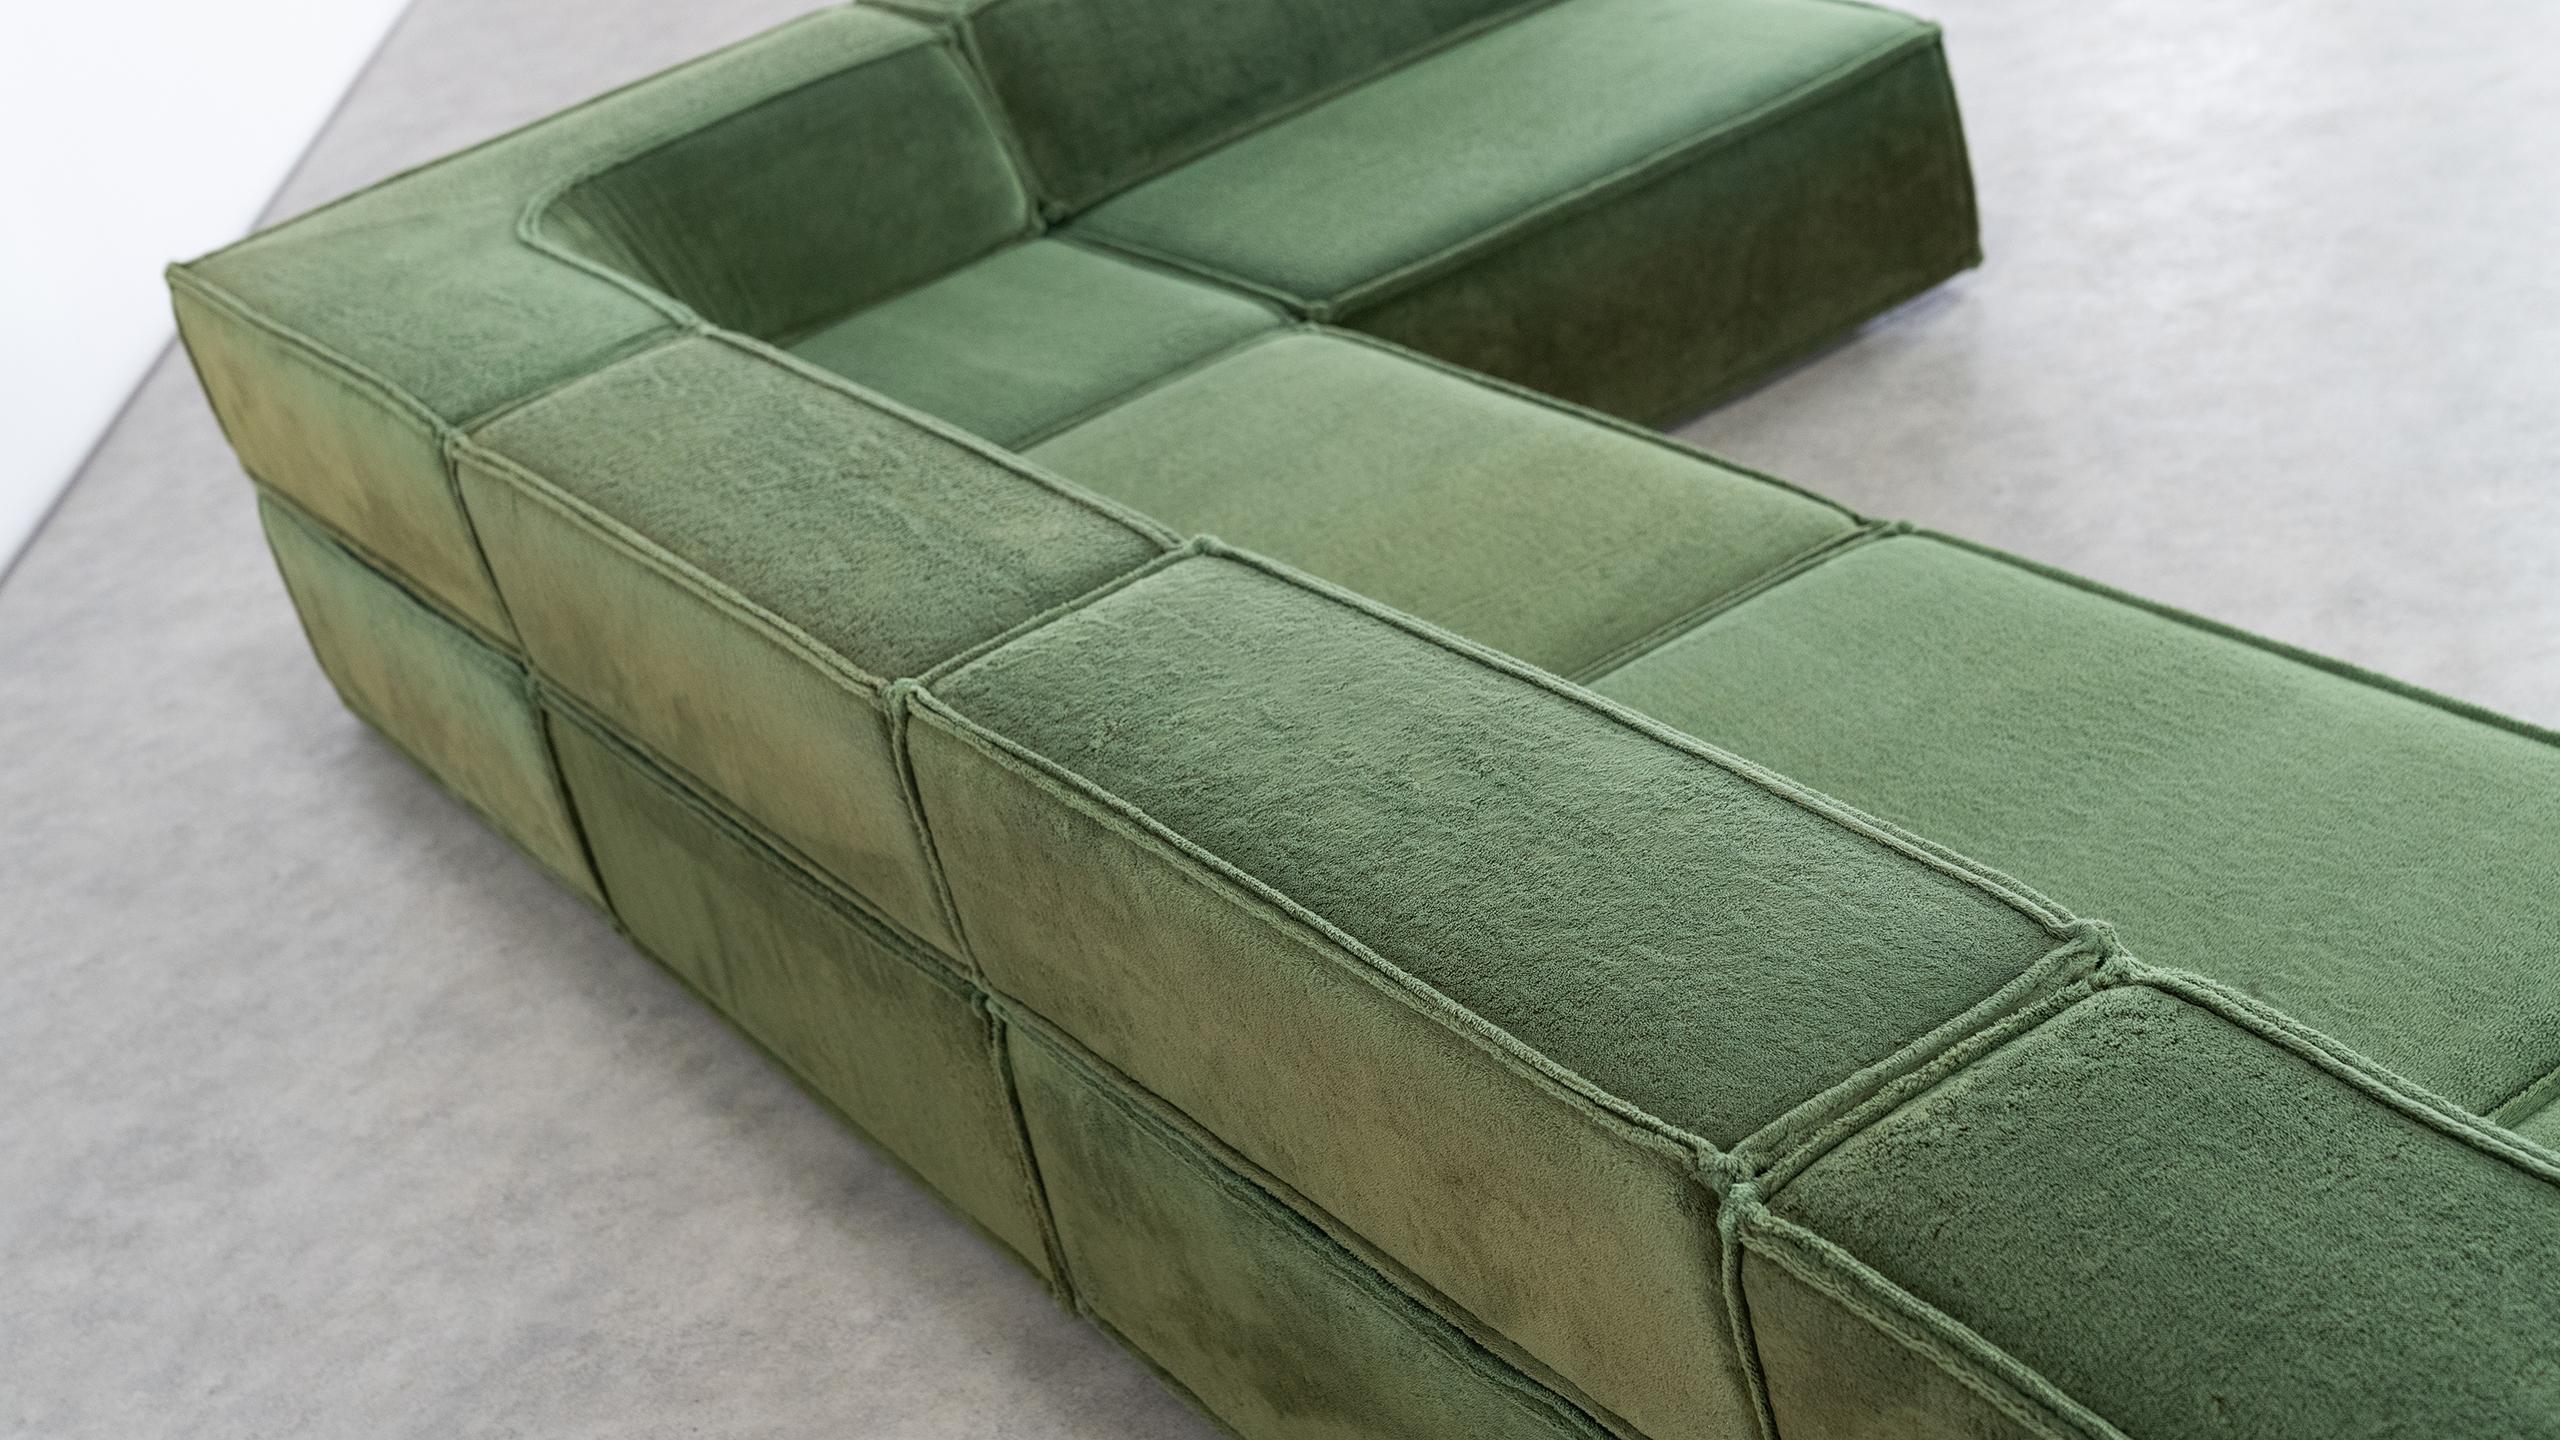 COR Trio Modular Sofa, Giant Landscape in Green, 1972 by Team Form AG, Swiss 7